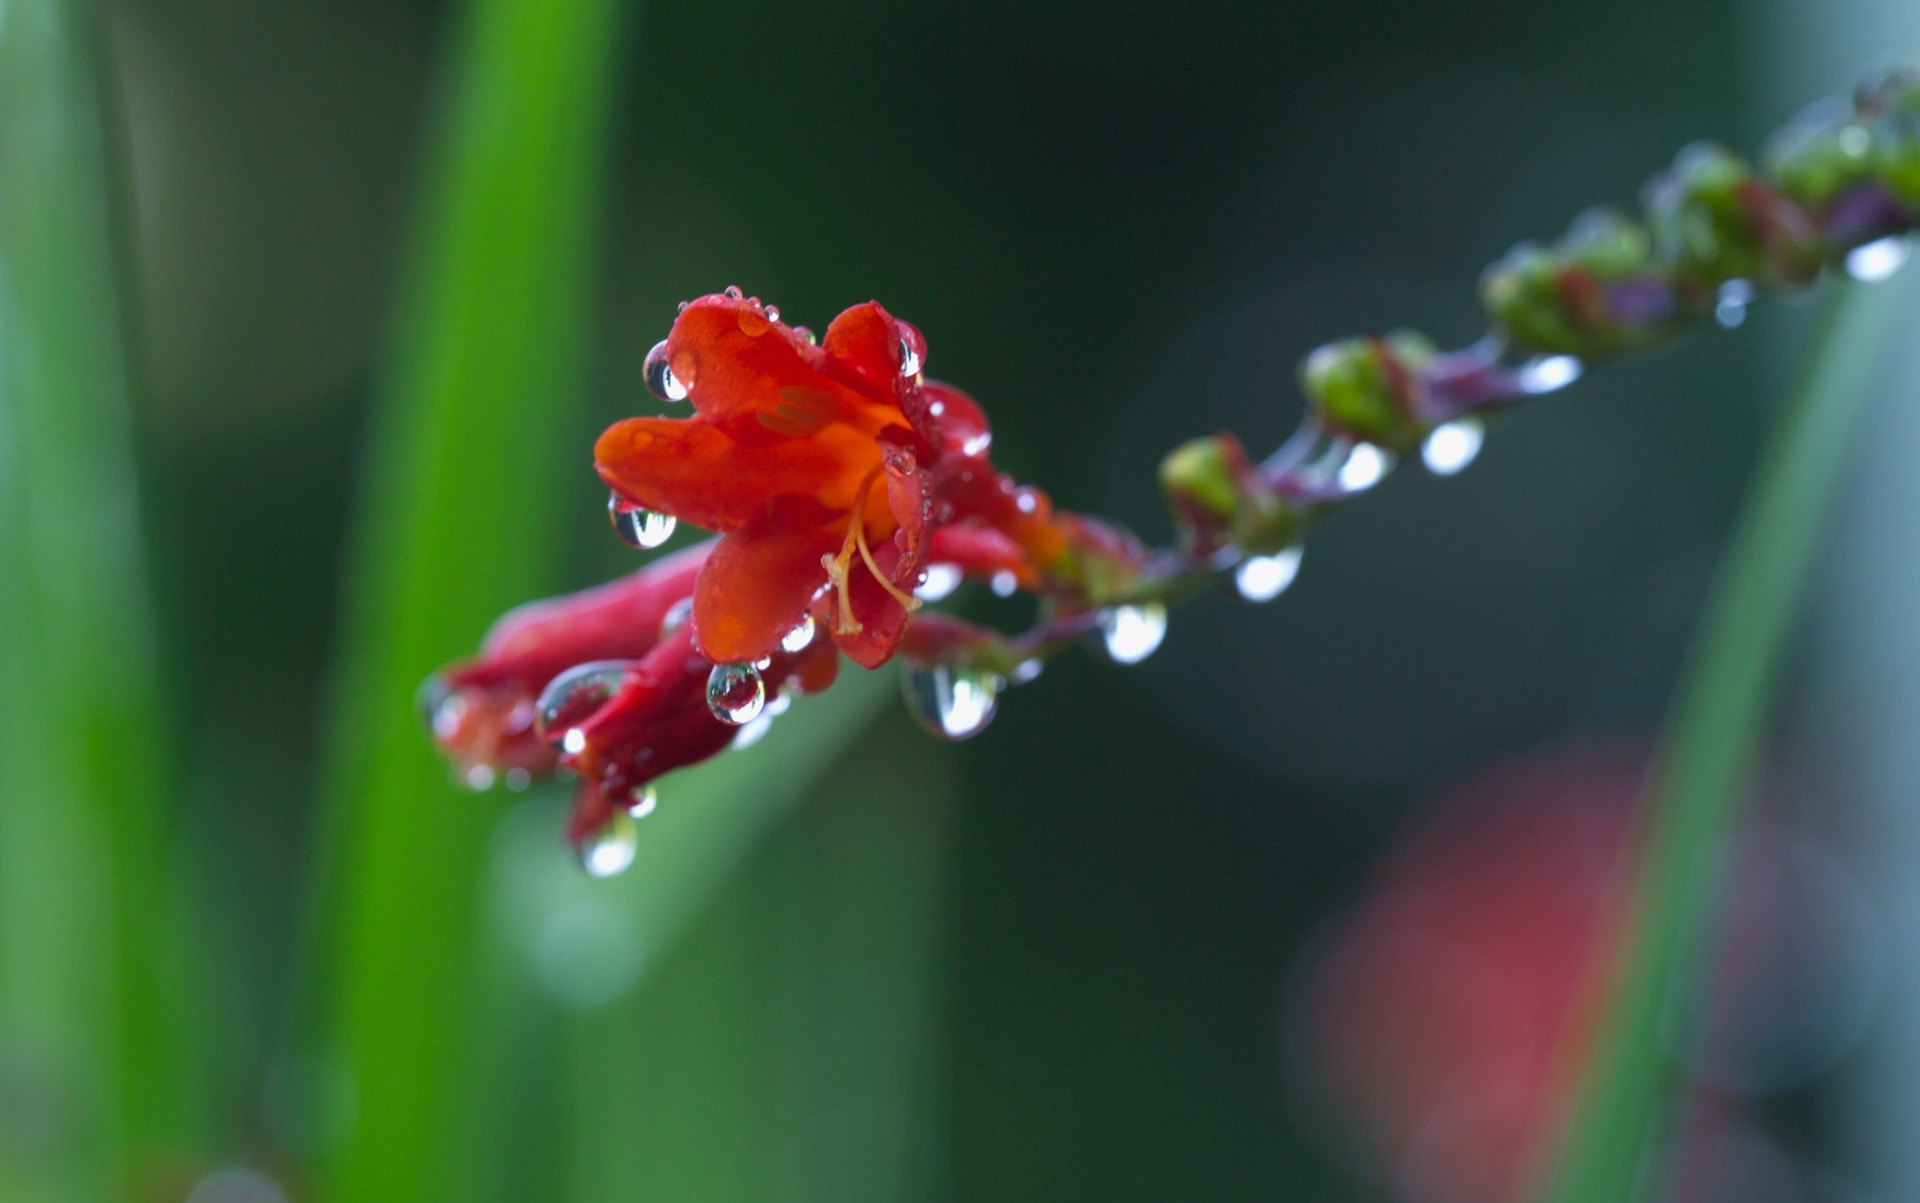 Cool Wallpapers background, drops, flower, plant, macro, dew, blurred, stem, stalk, greased